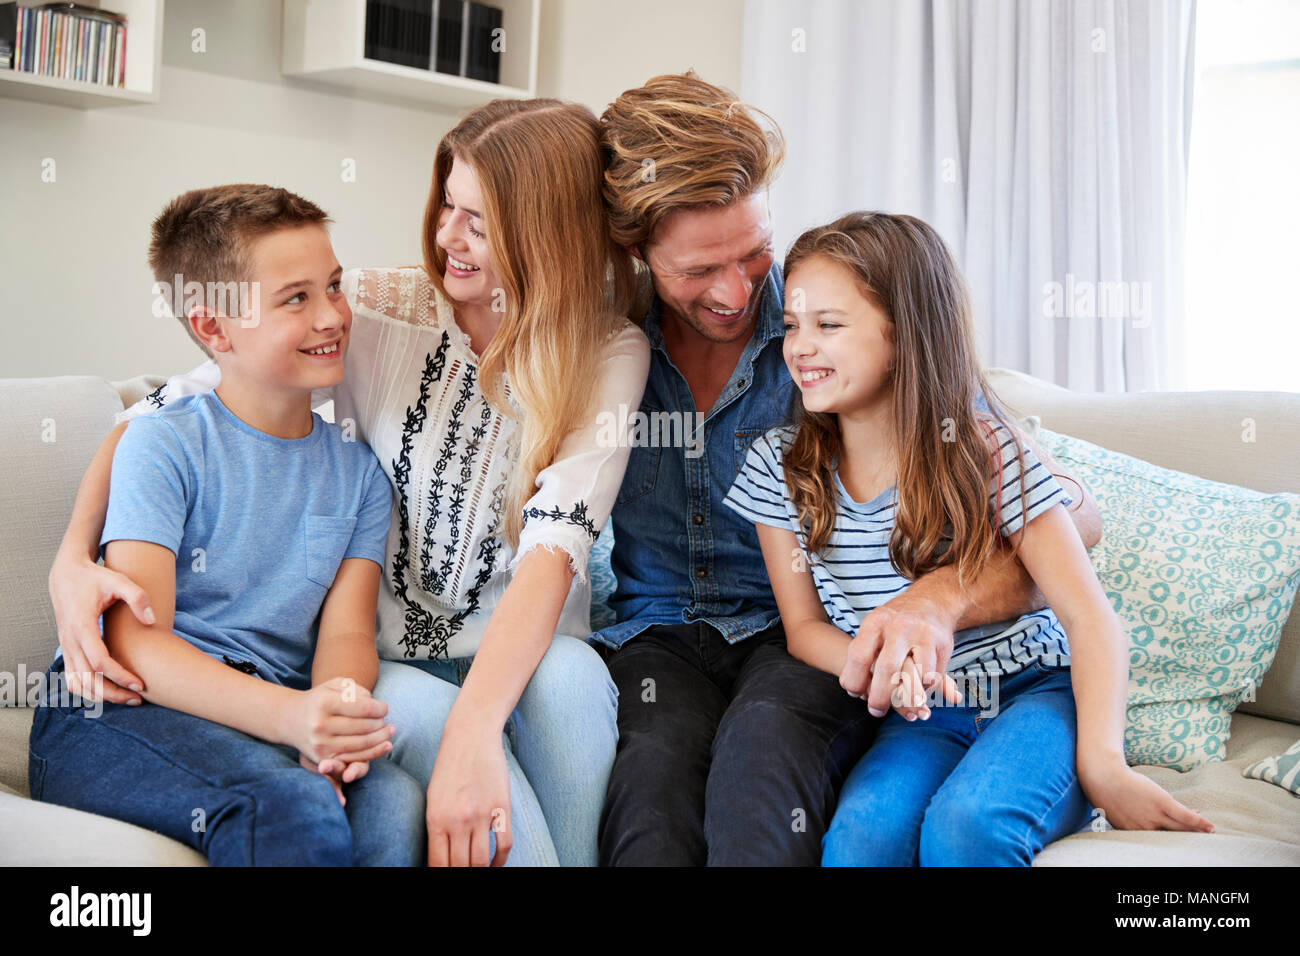 Smiling Family Relaxing On Sofa At Home Together Banque D'Images